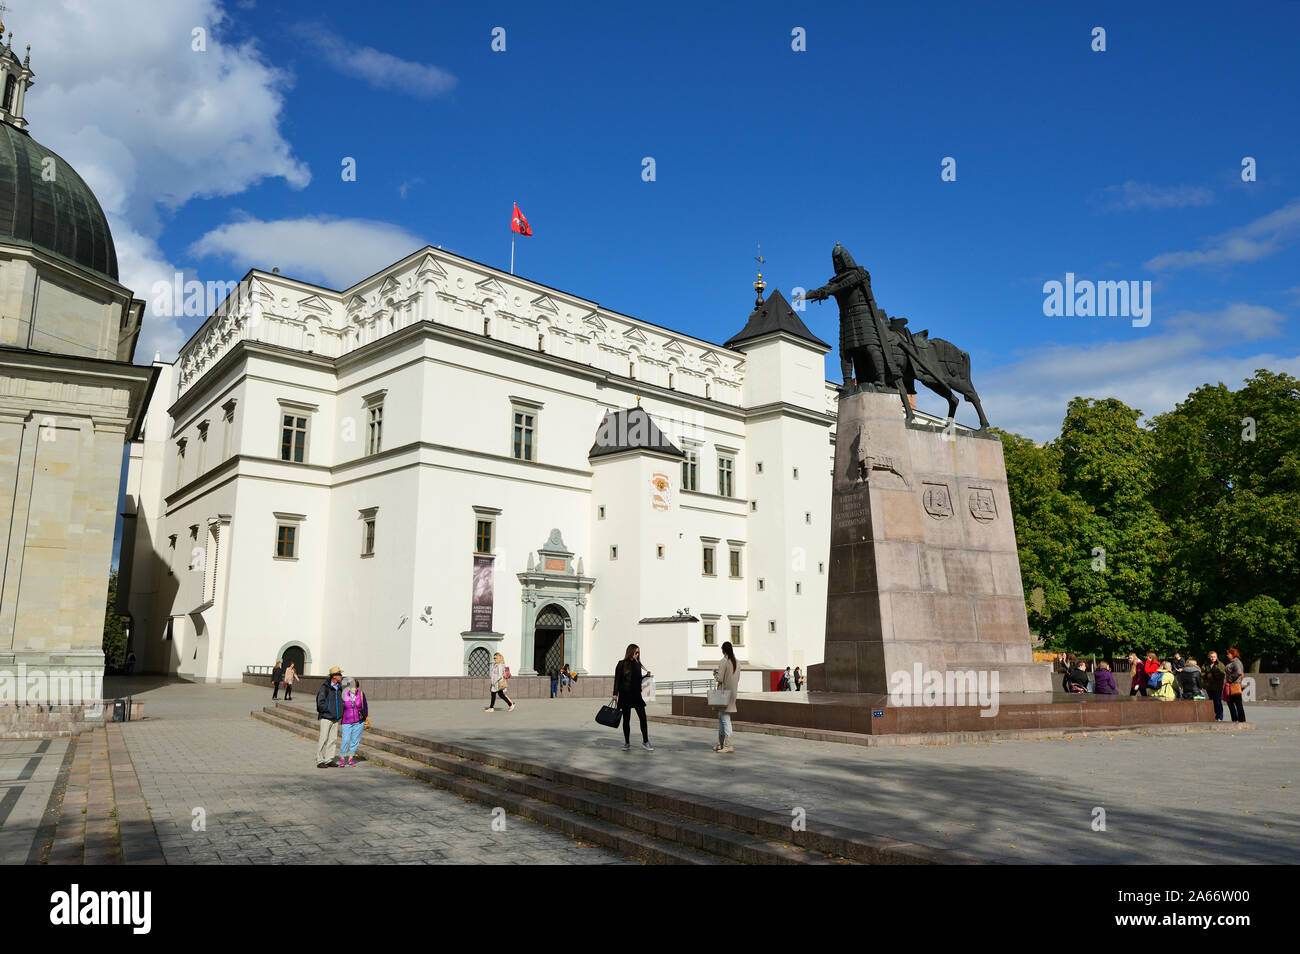 The Palace of the Grand Dukes of Lithuania and the statue of King Gediminas. Vilnius, Lithuania Stock Photo